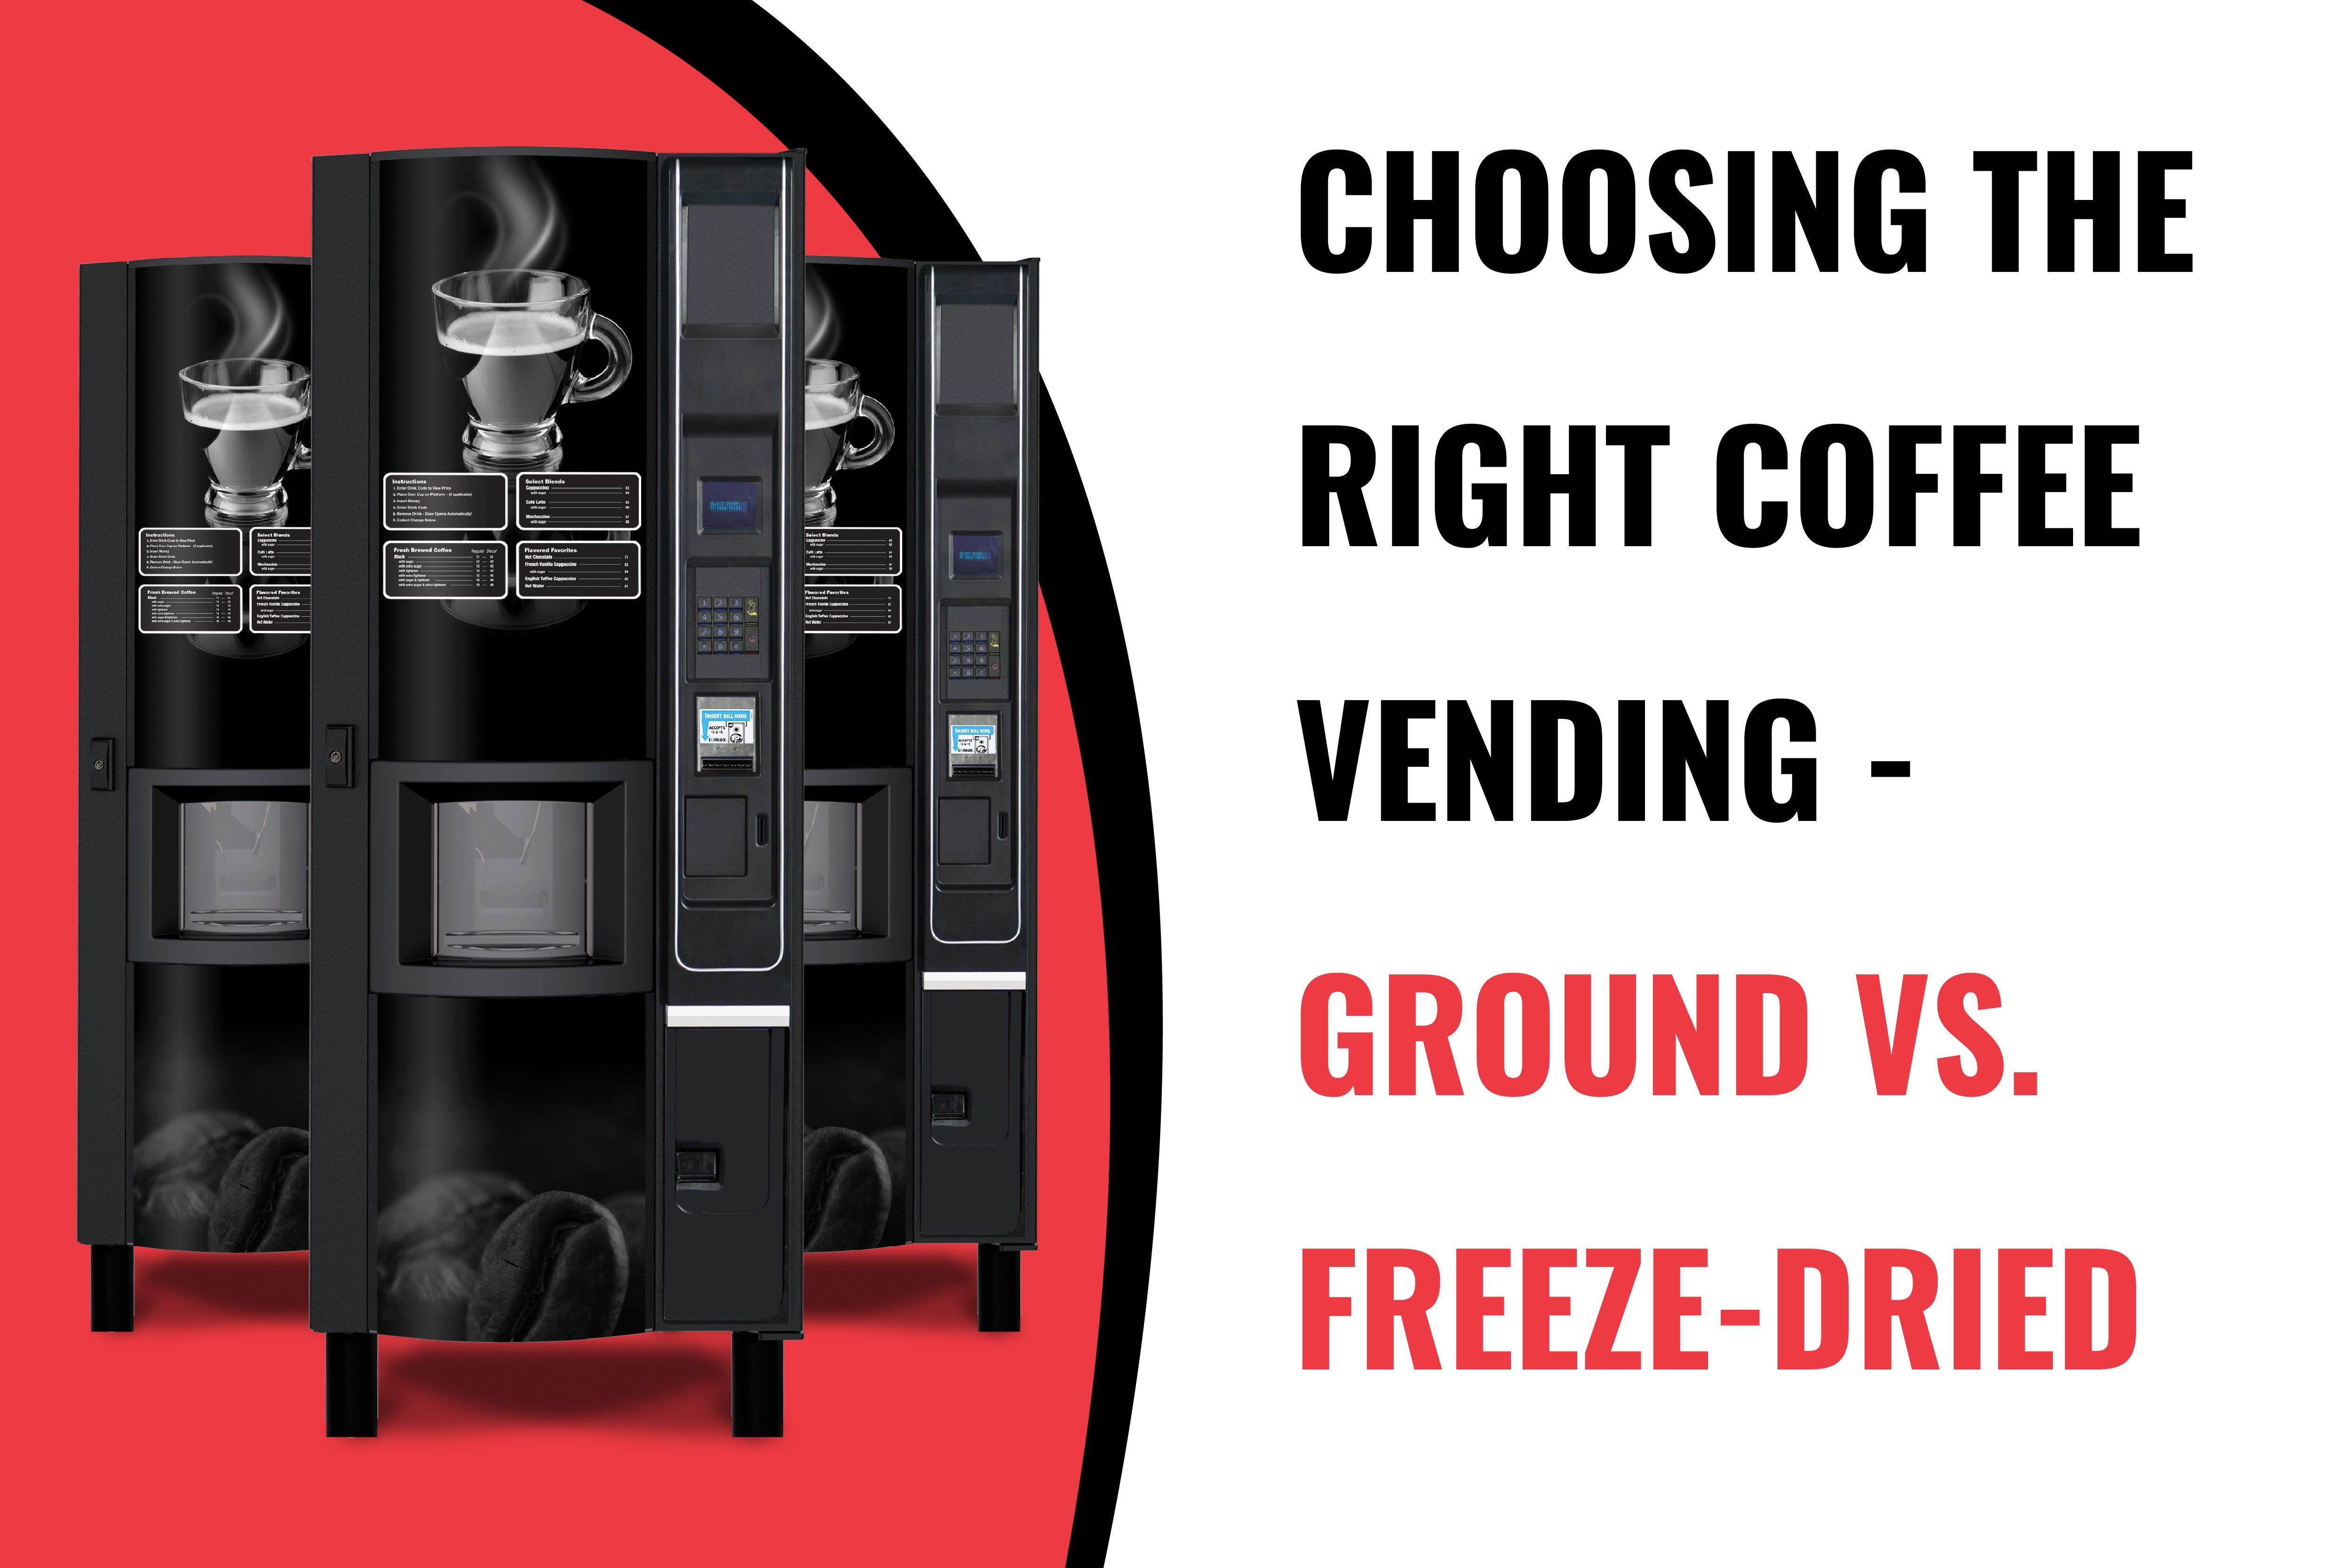 Hot Beverage Vending: Choosing the Right Coffee Vending - Ground vs. Freeze-Dried - Vendnet